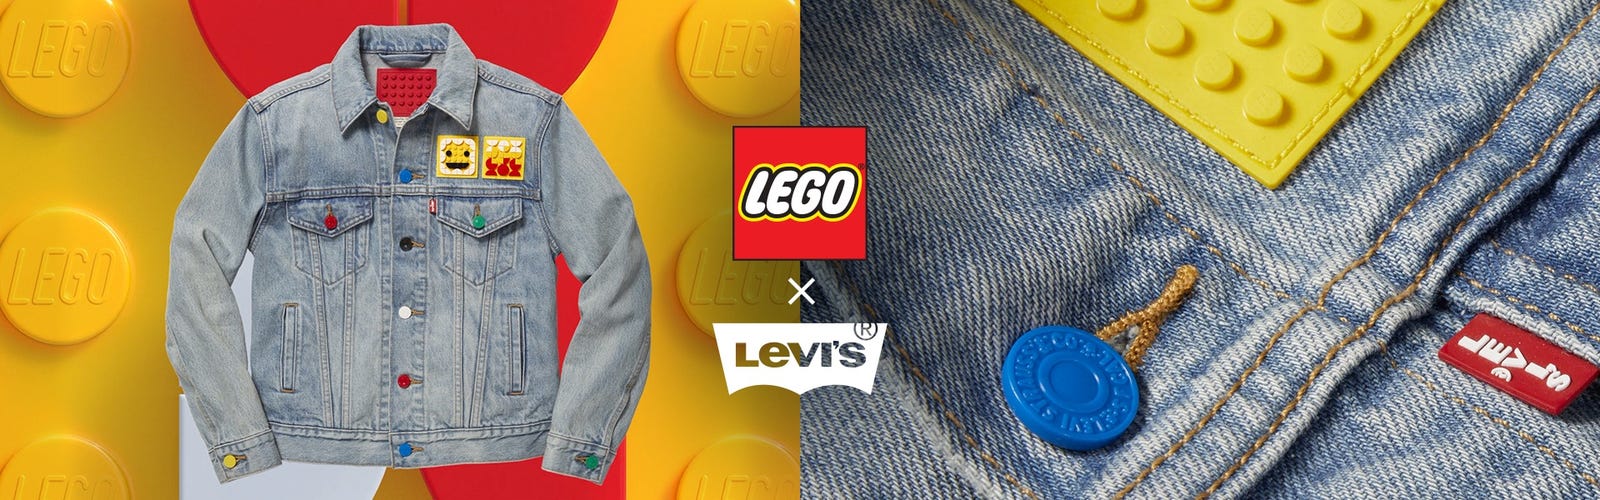 muggen renere et eller andet sted Wearable art" is the motto of the new partnership LEGO Group for Levi's -  Wait! Fashion